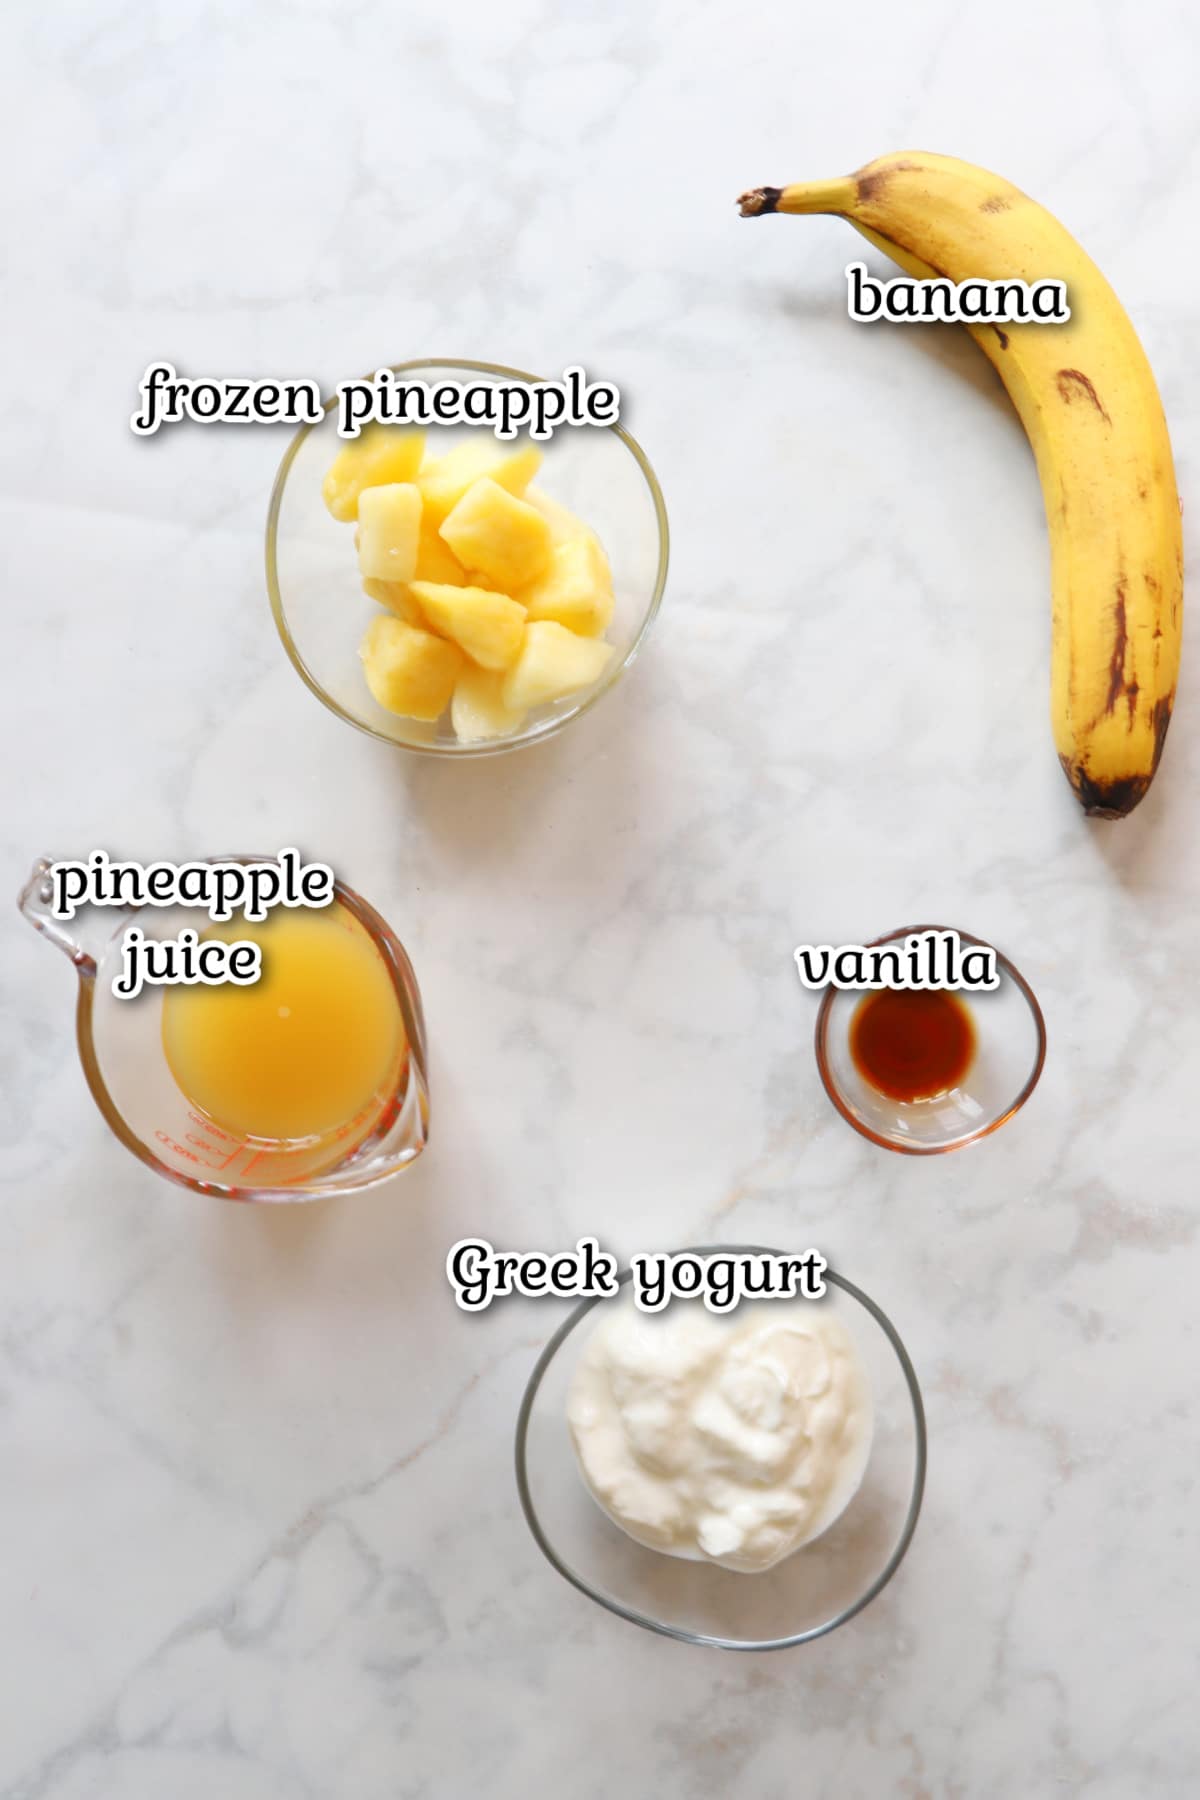 An image of the recipe ingredients with text overlay.